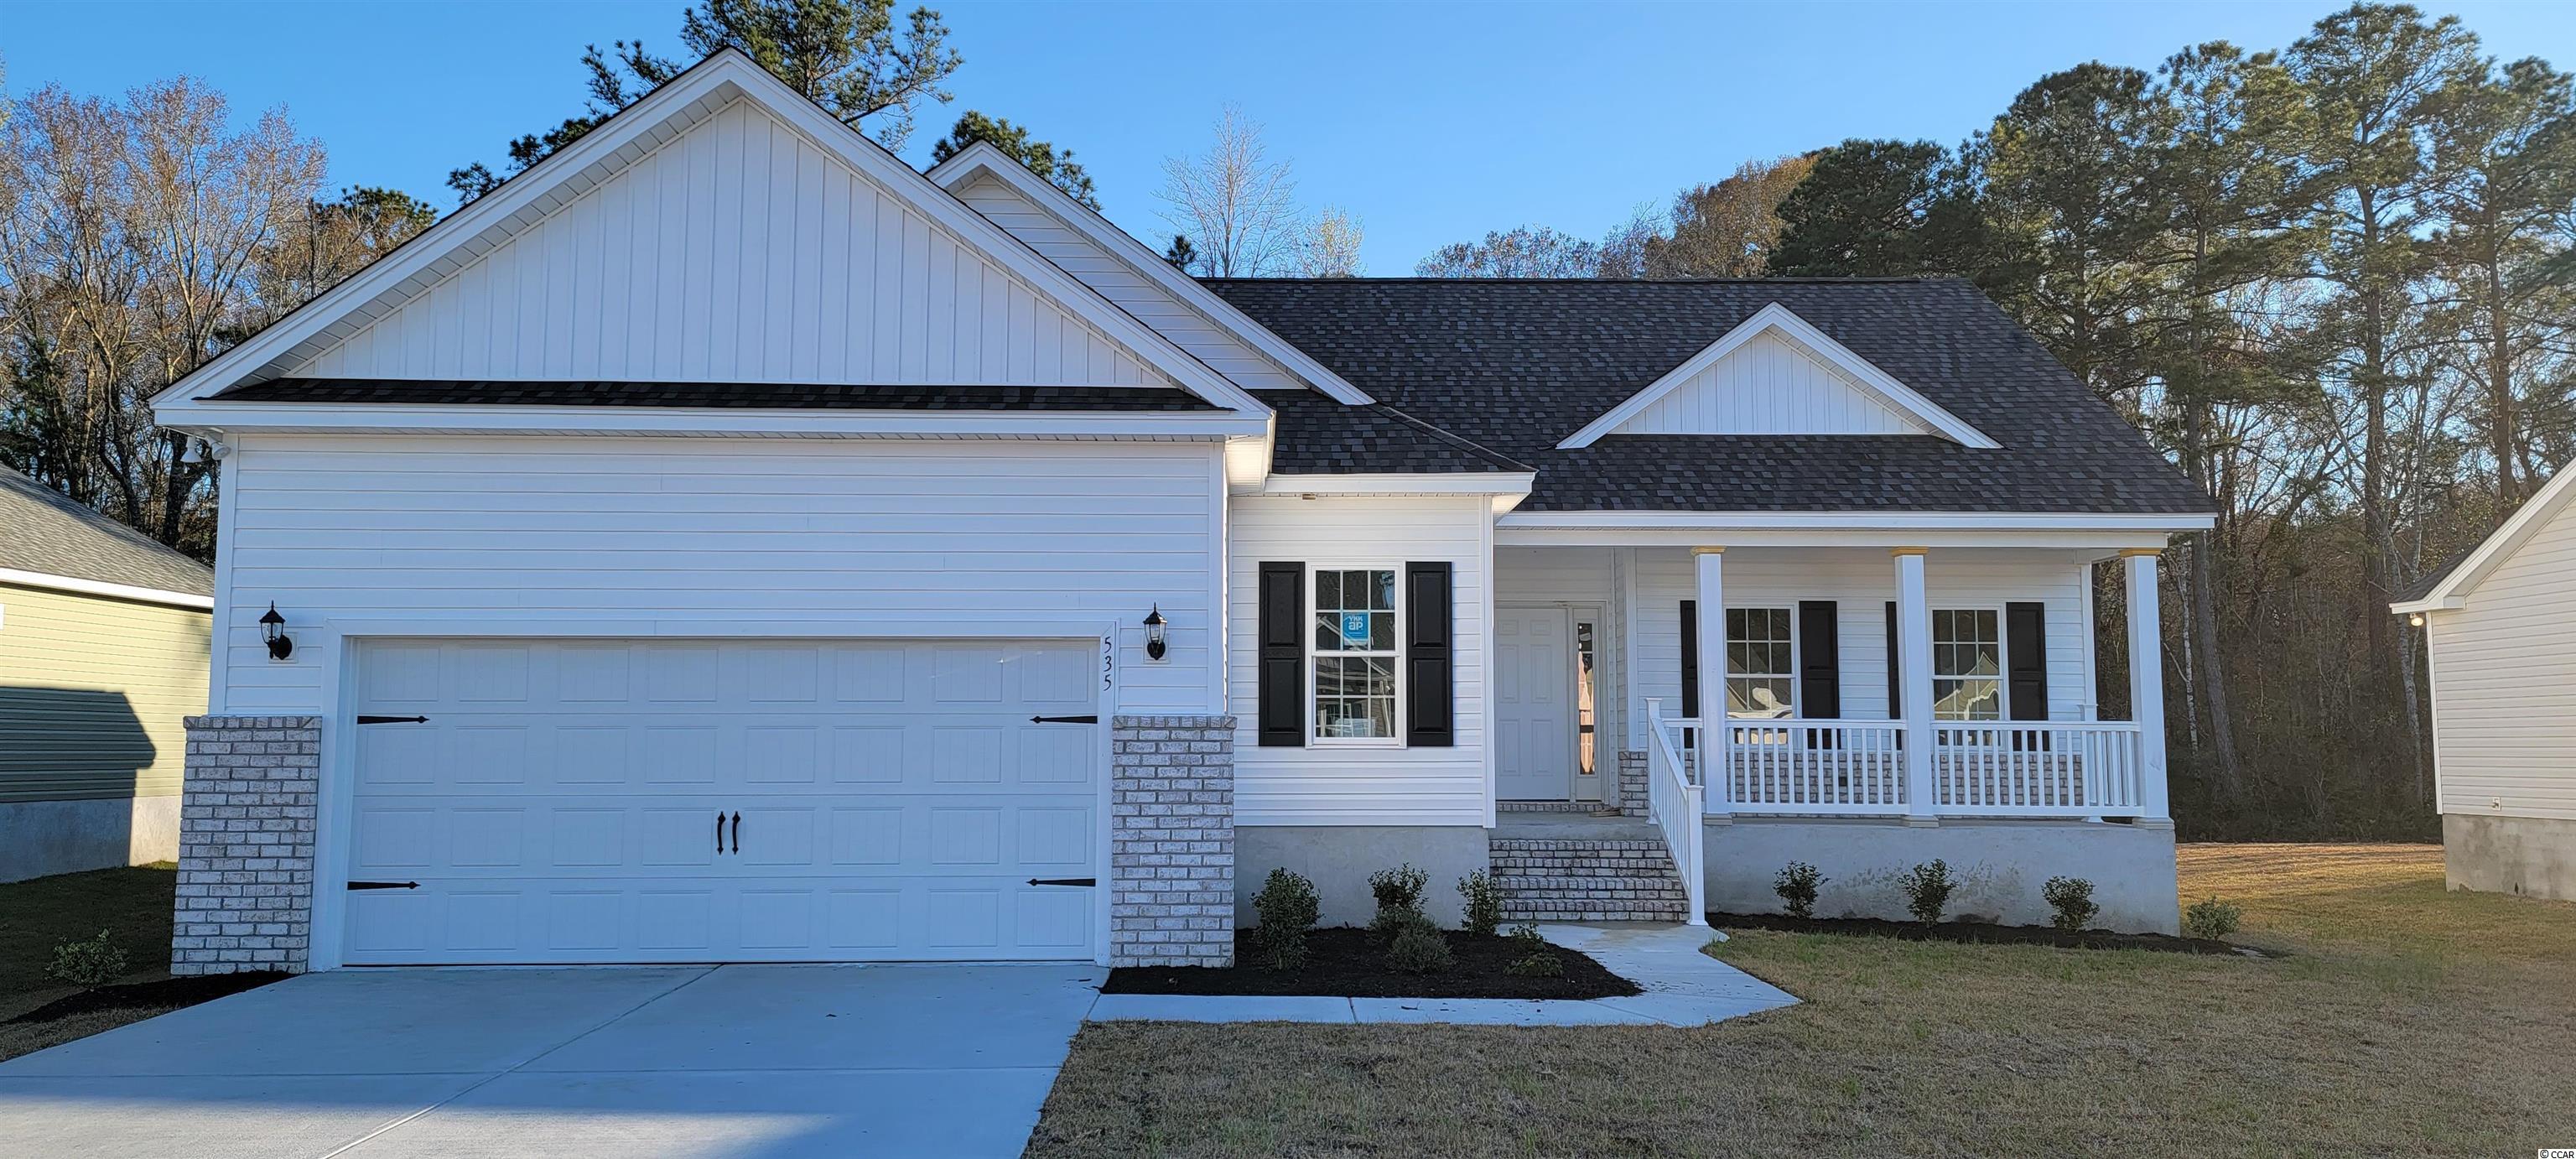 535 Rose Ave. Georgetown, SC 29440